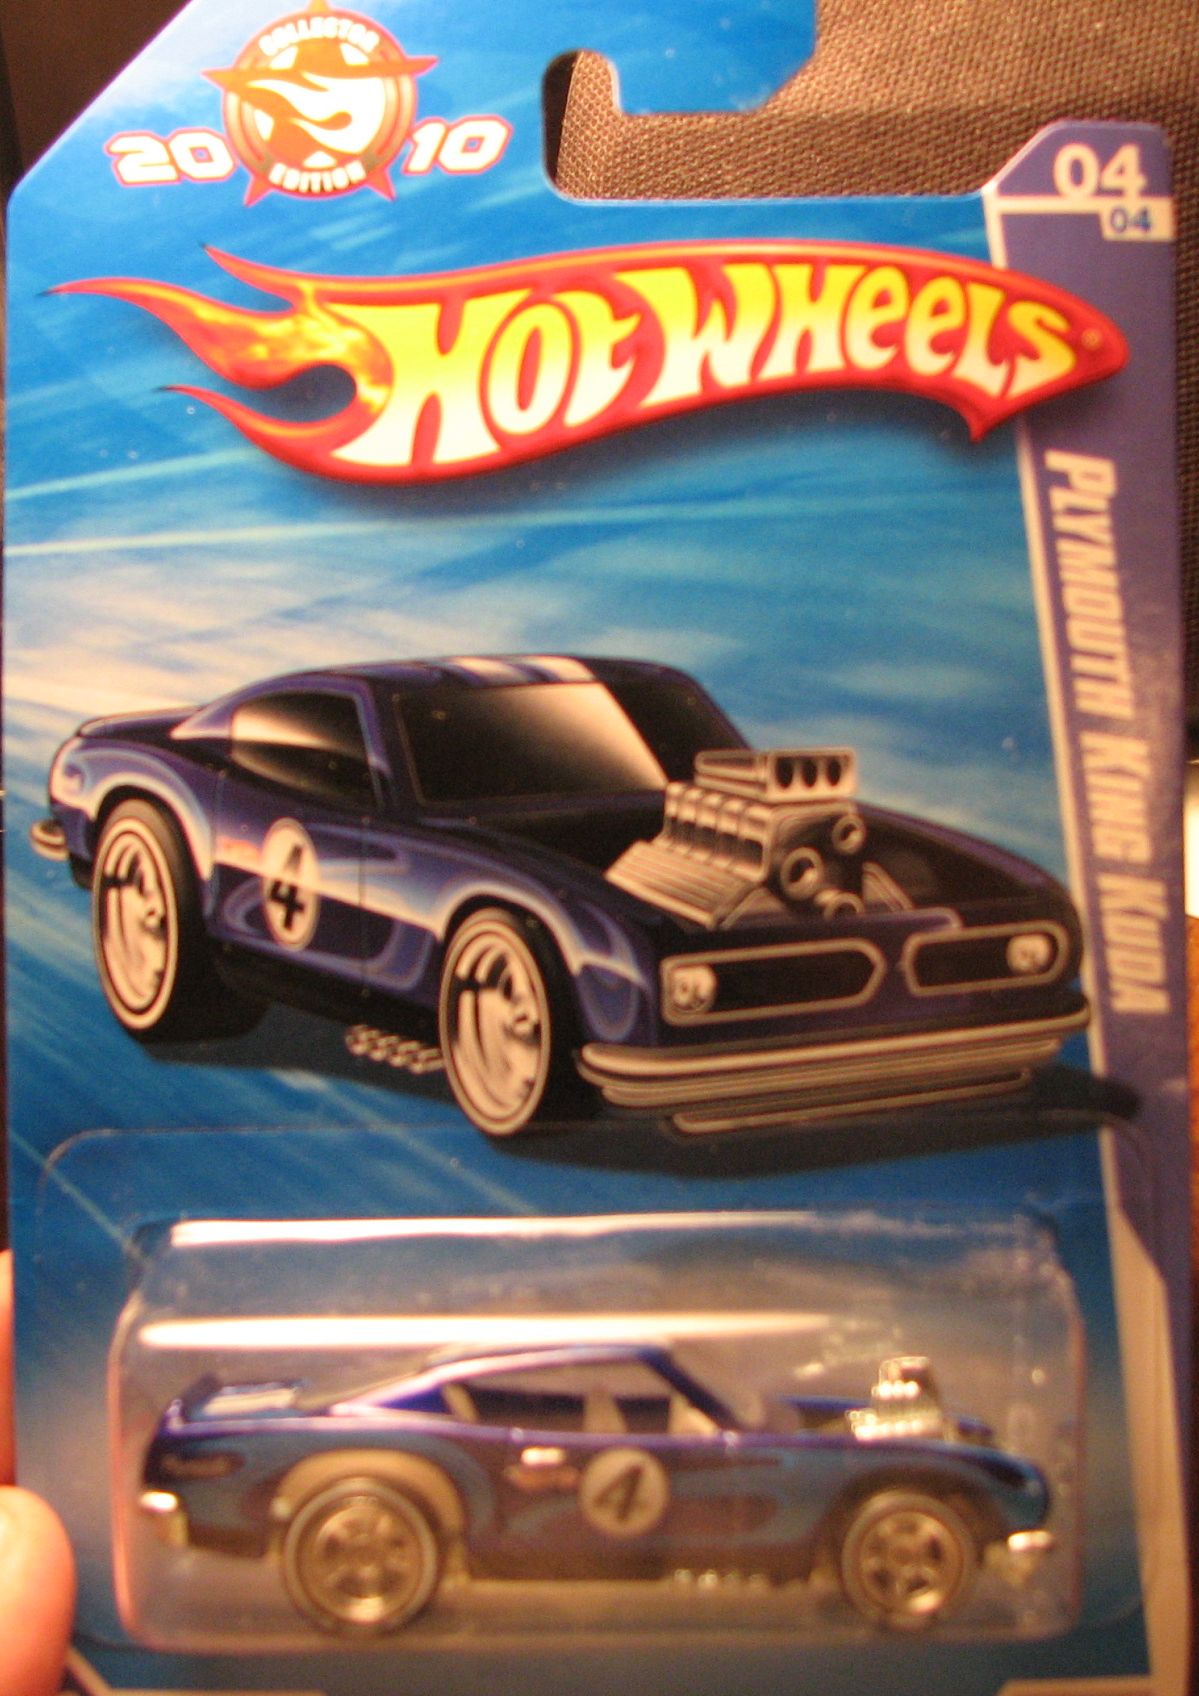 Image 2010collectoreditionplymouthkingkudacarded Hot Wheels